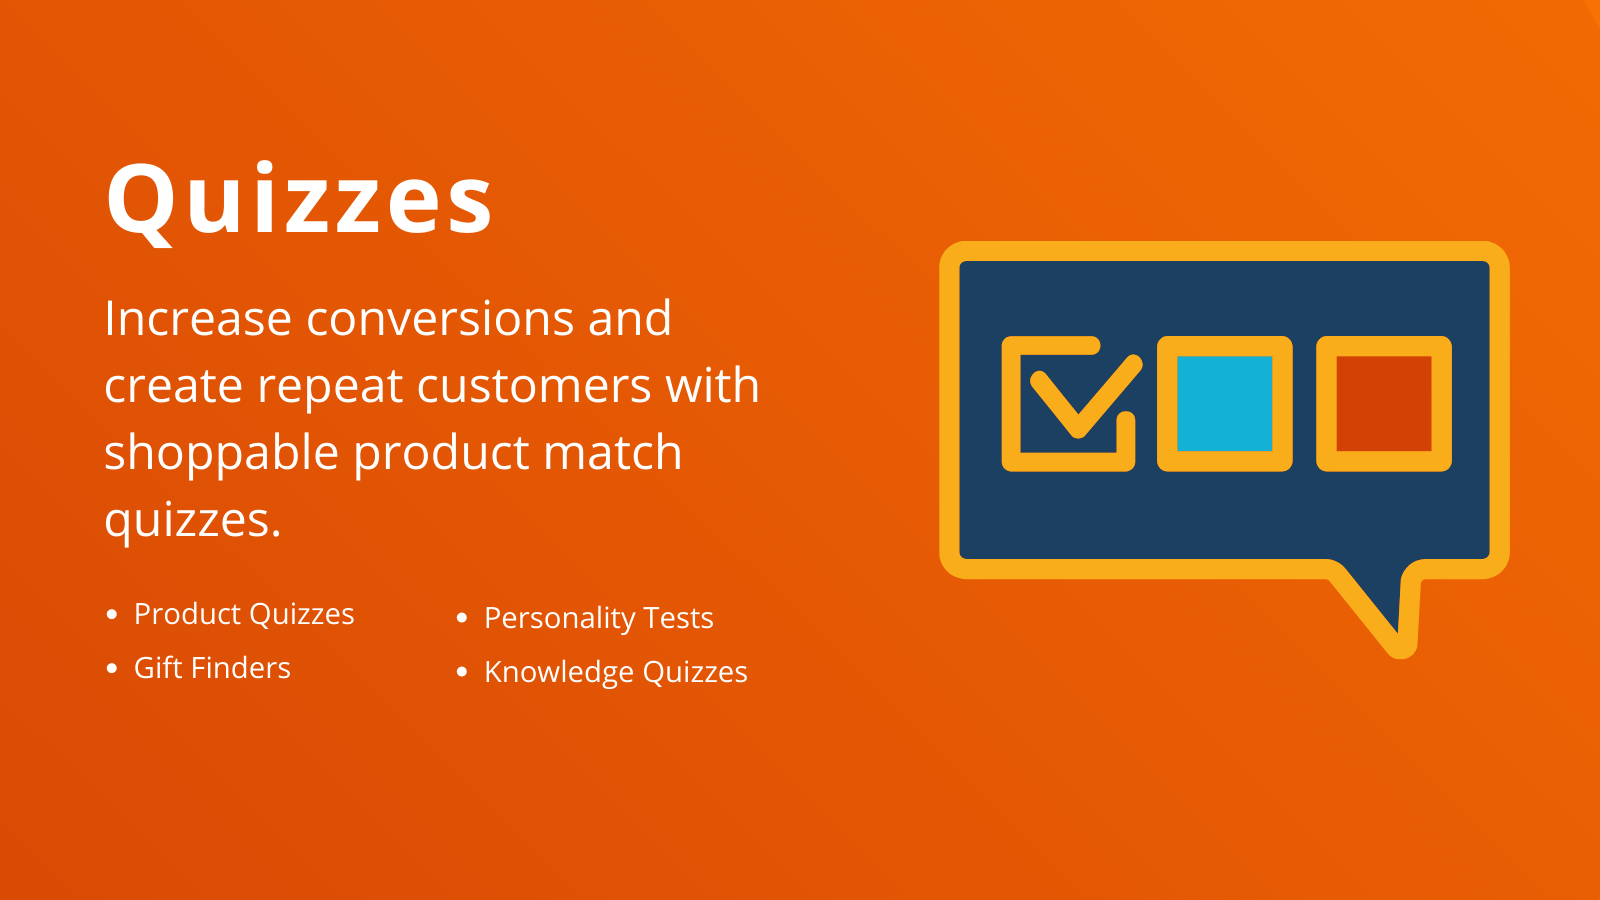 Quizzes, Product Quizzes, Gift Finders, Personality Tests